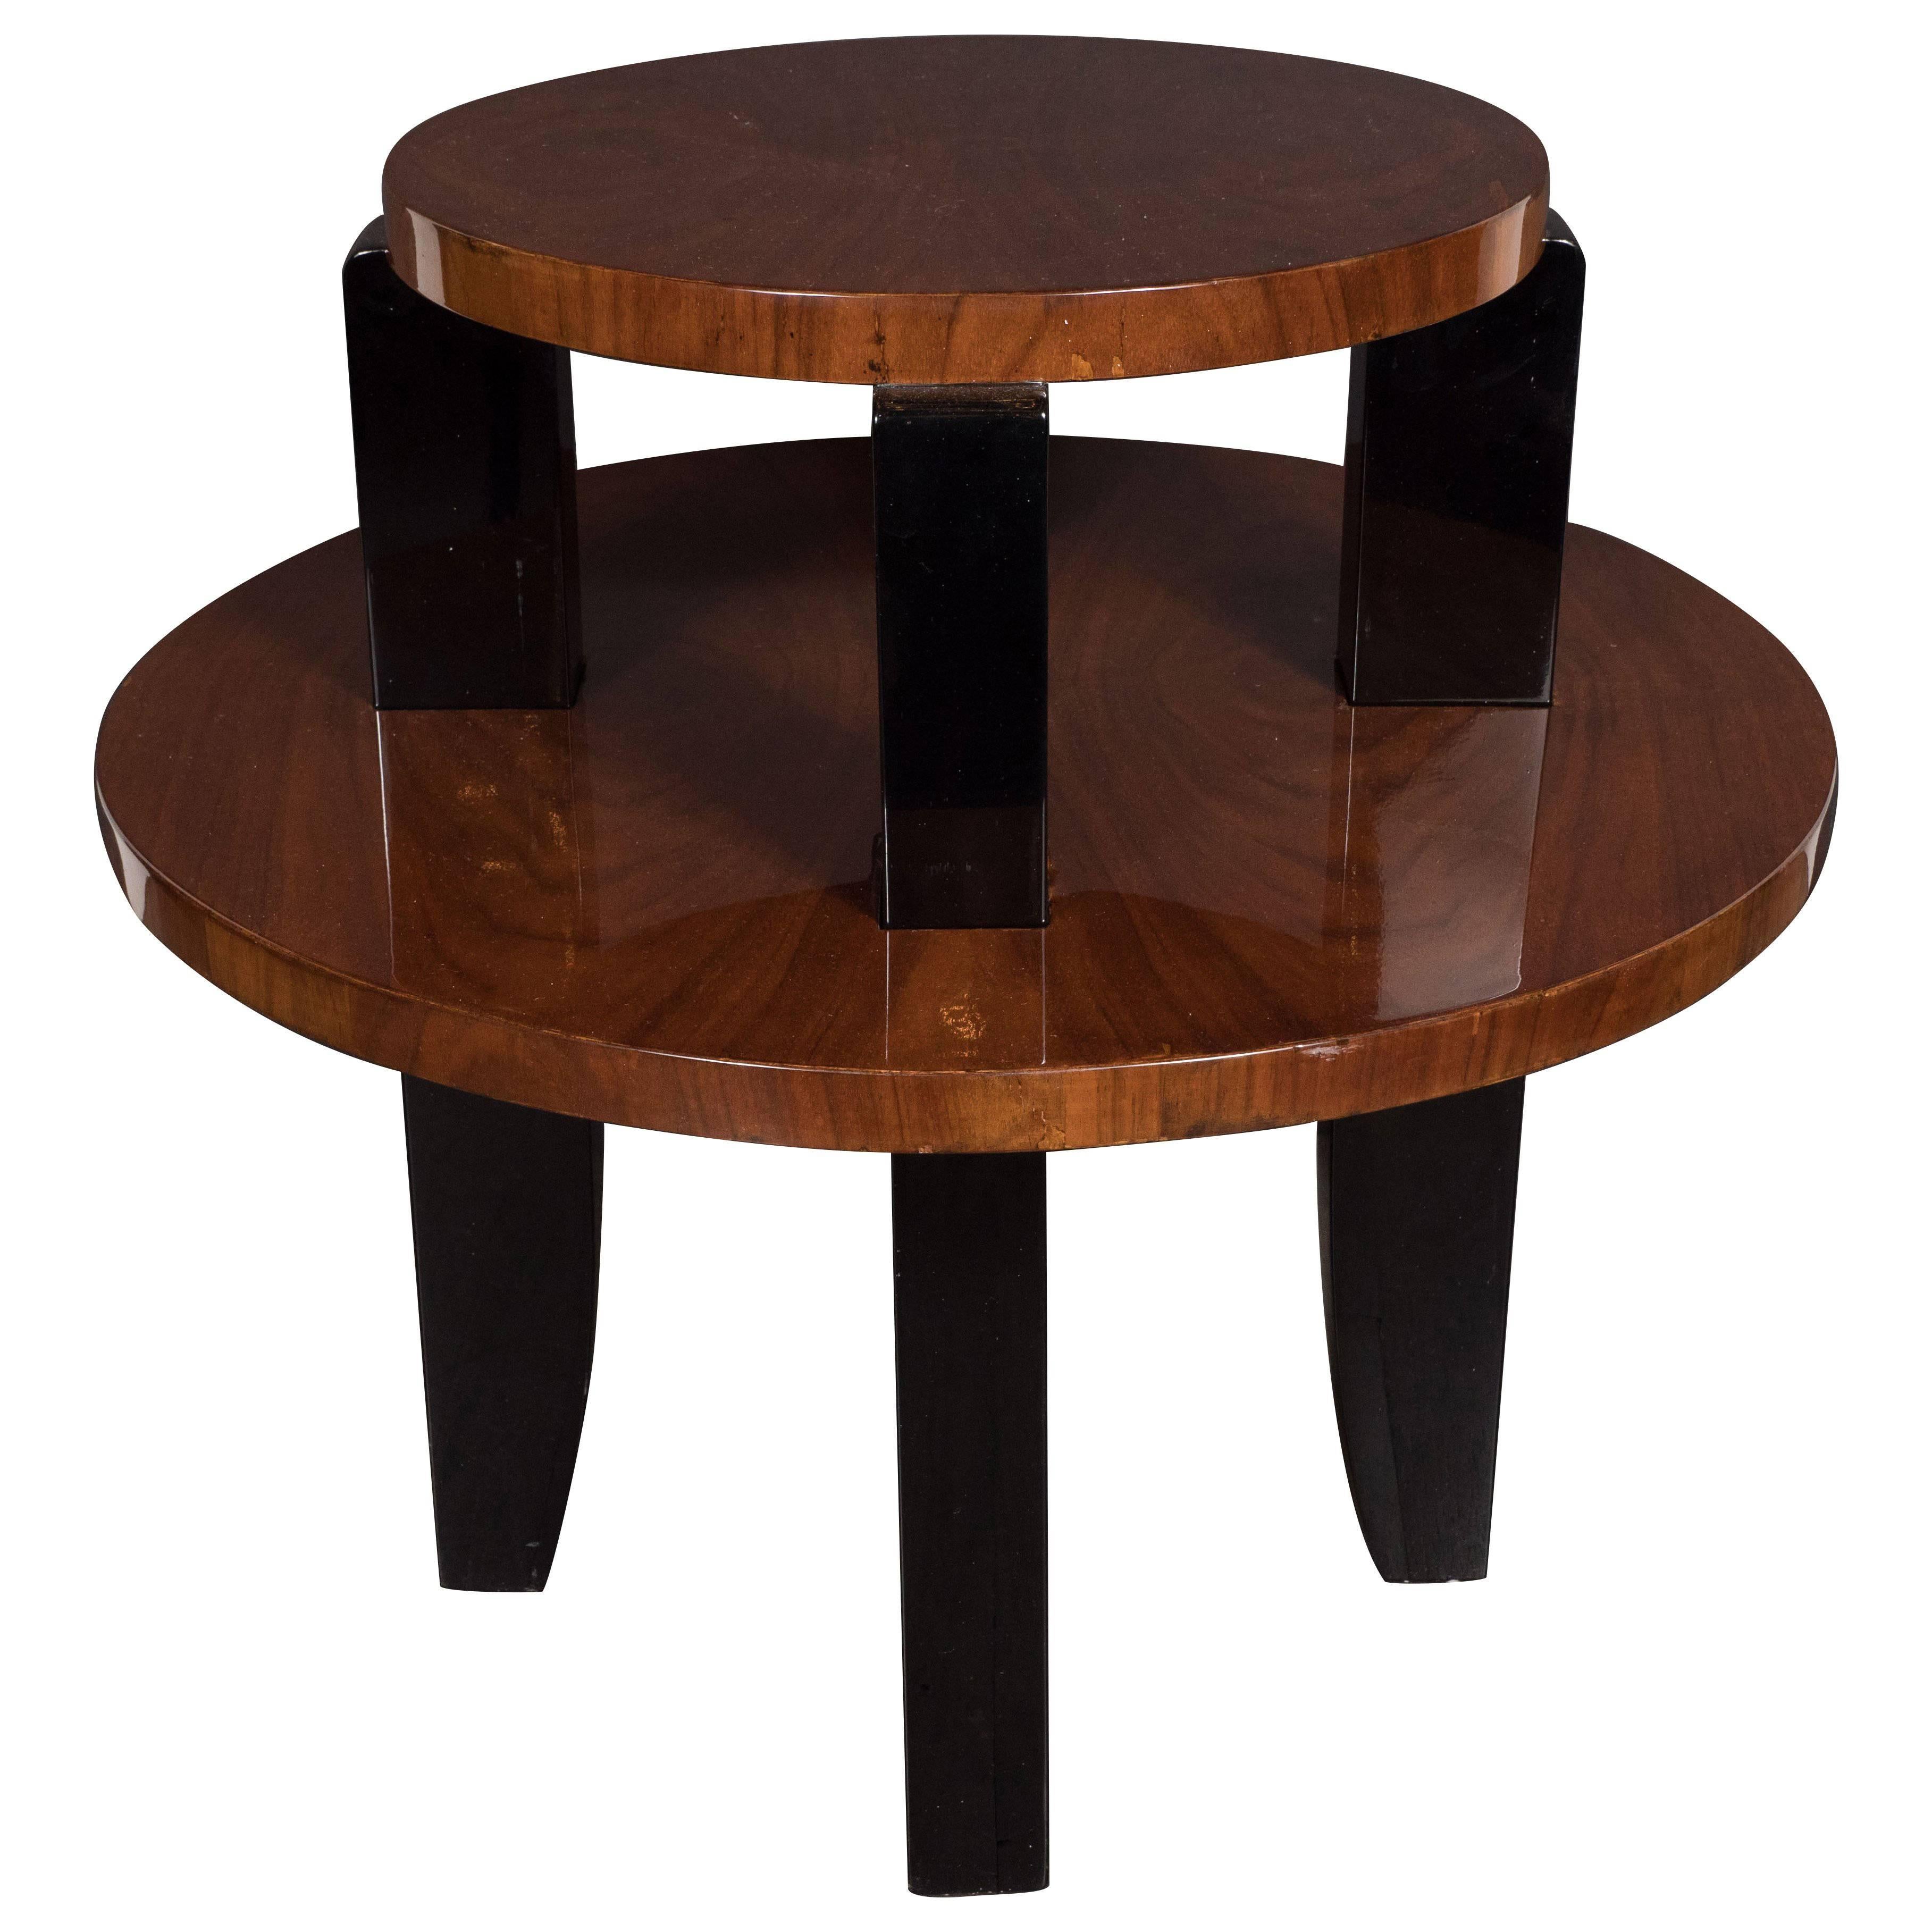 French Art Deco Two-Tier Occasional/Side Table in Walnut and Black Lacquer